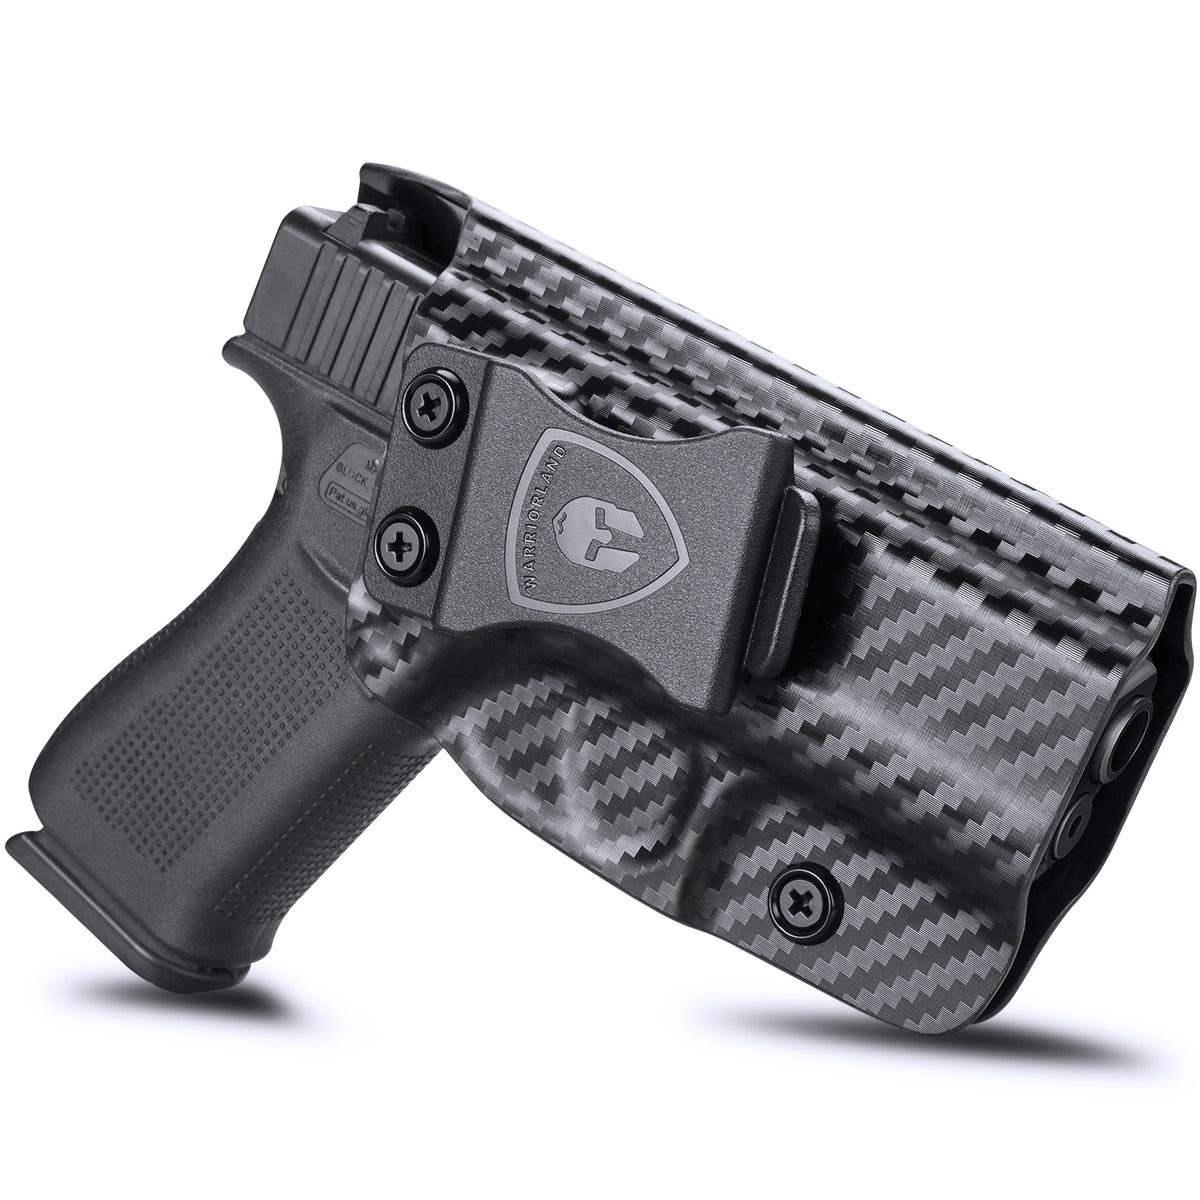 IWB/OWB Glock Holster, Manufacturer : Concealment Express (Rounded Gear),  Model : Druid Glock MOS, Color : Carbon TargetZone